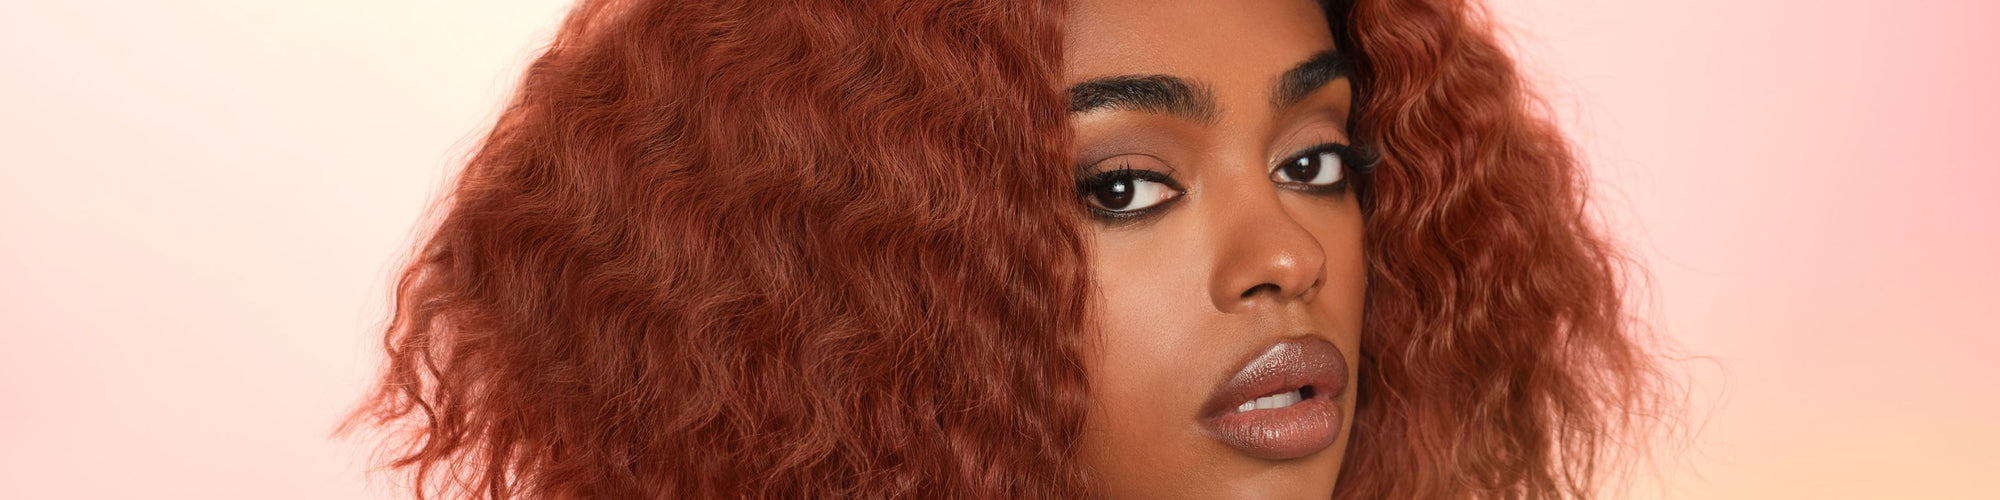 A close up face view of a beautiful woman in an auburn red wig on a pink background.